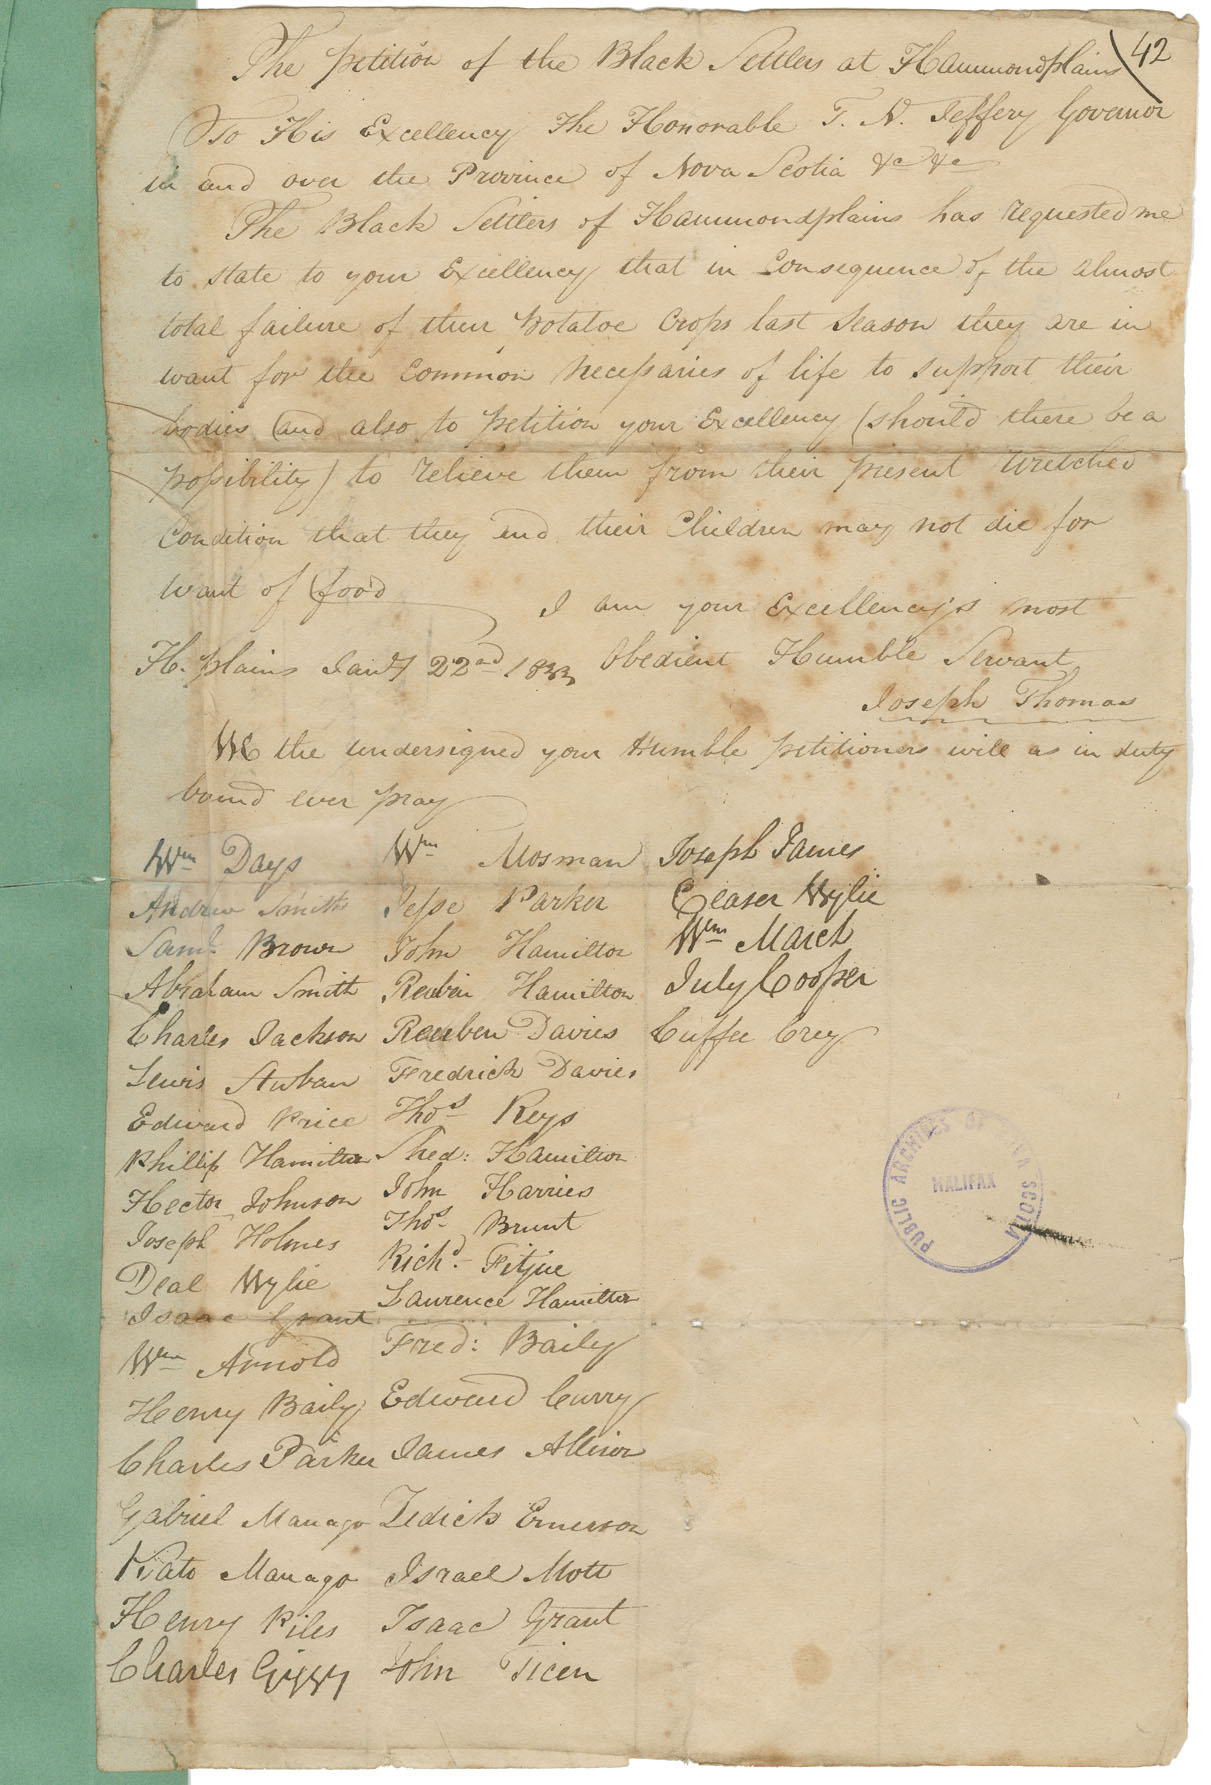 african-heritage : Petition from Black settlers at Hammonds Plains to Thomas N. Jeffery, Collector of Customs, praying for relief, as they are in a state of de